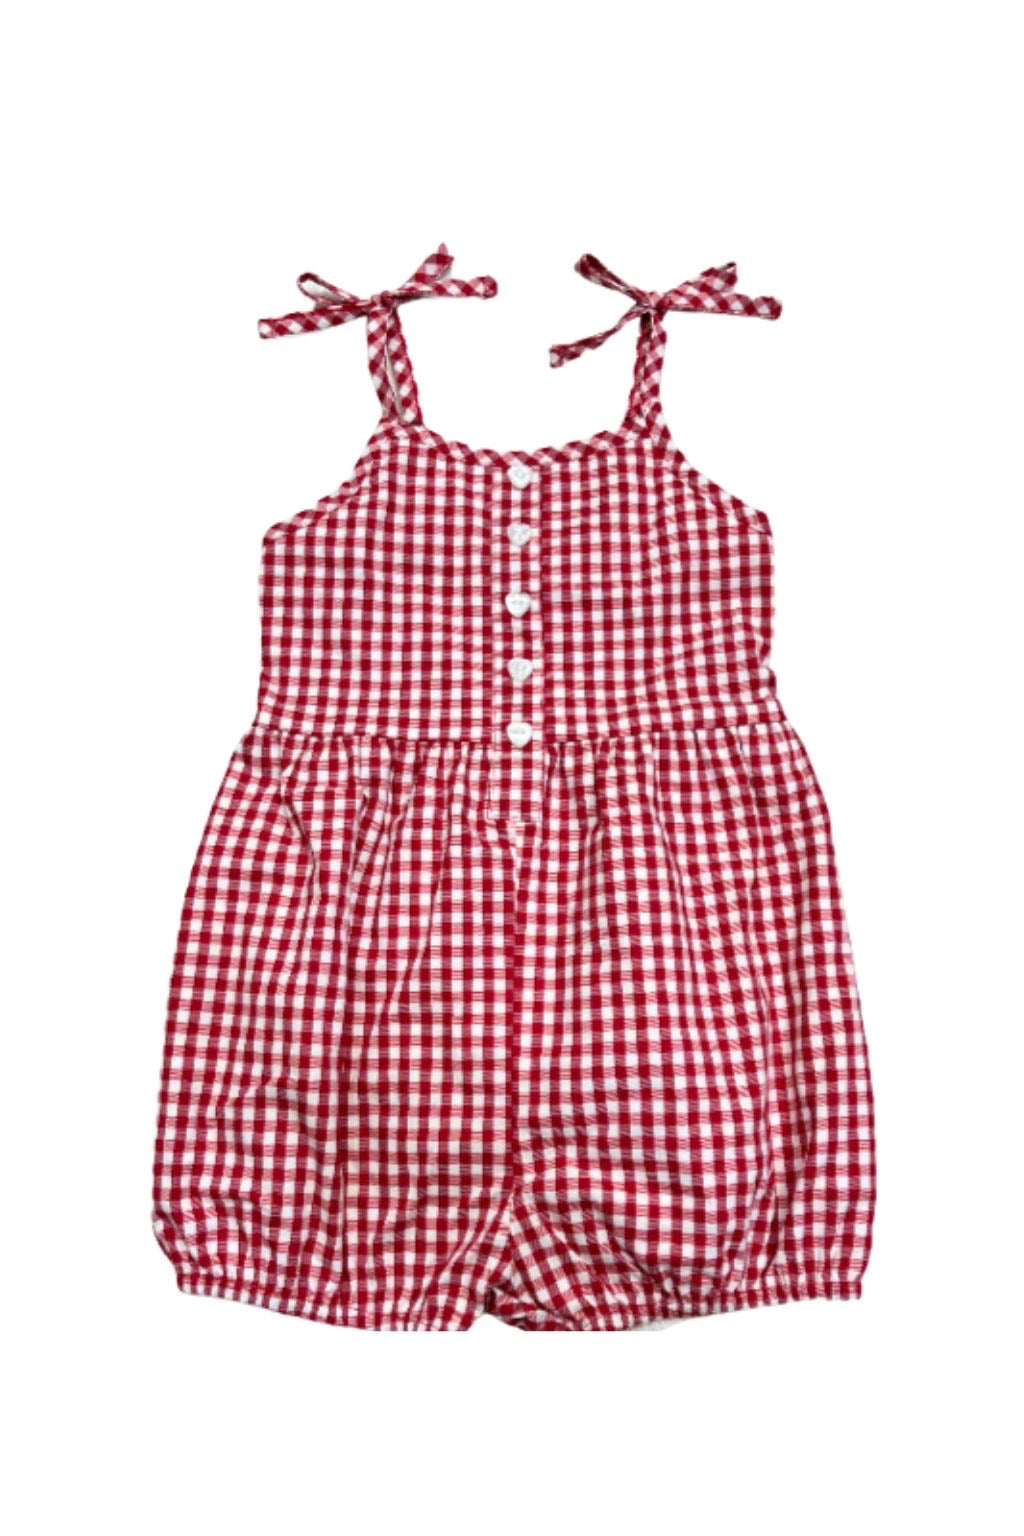 Red Gingham Bubble Romper